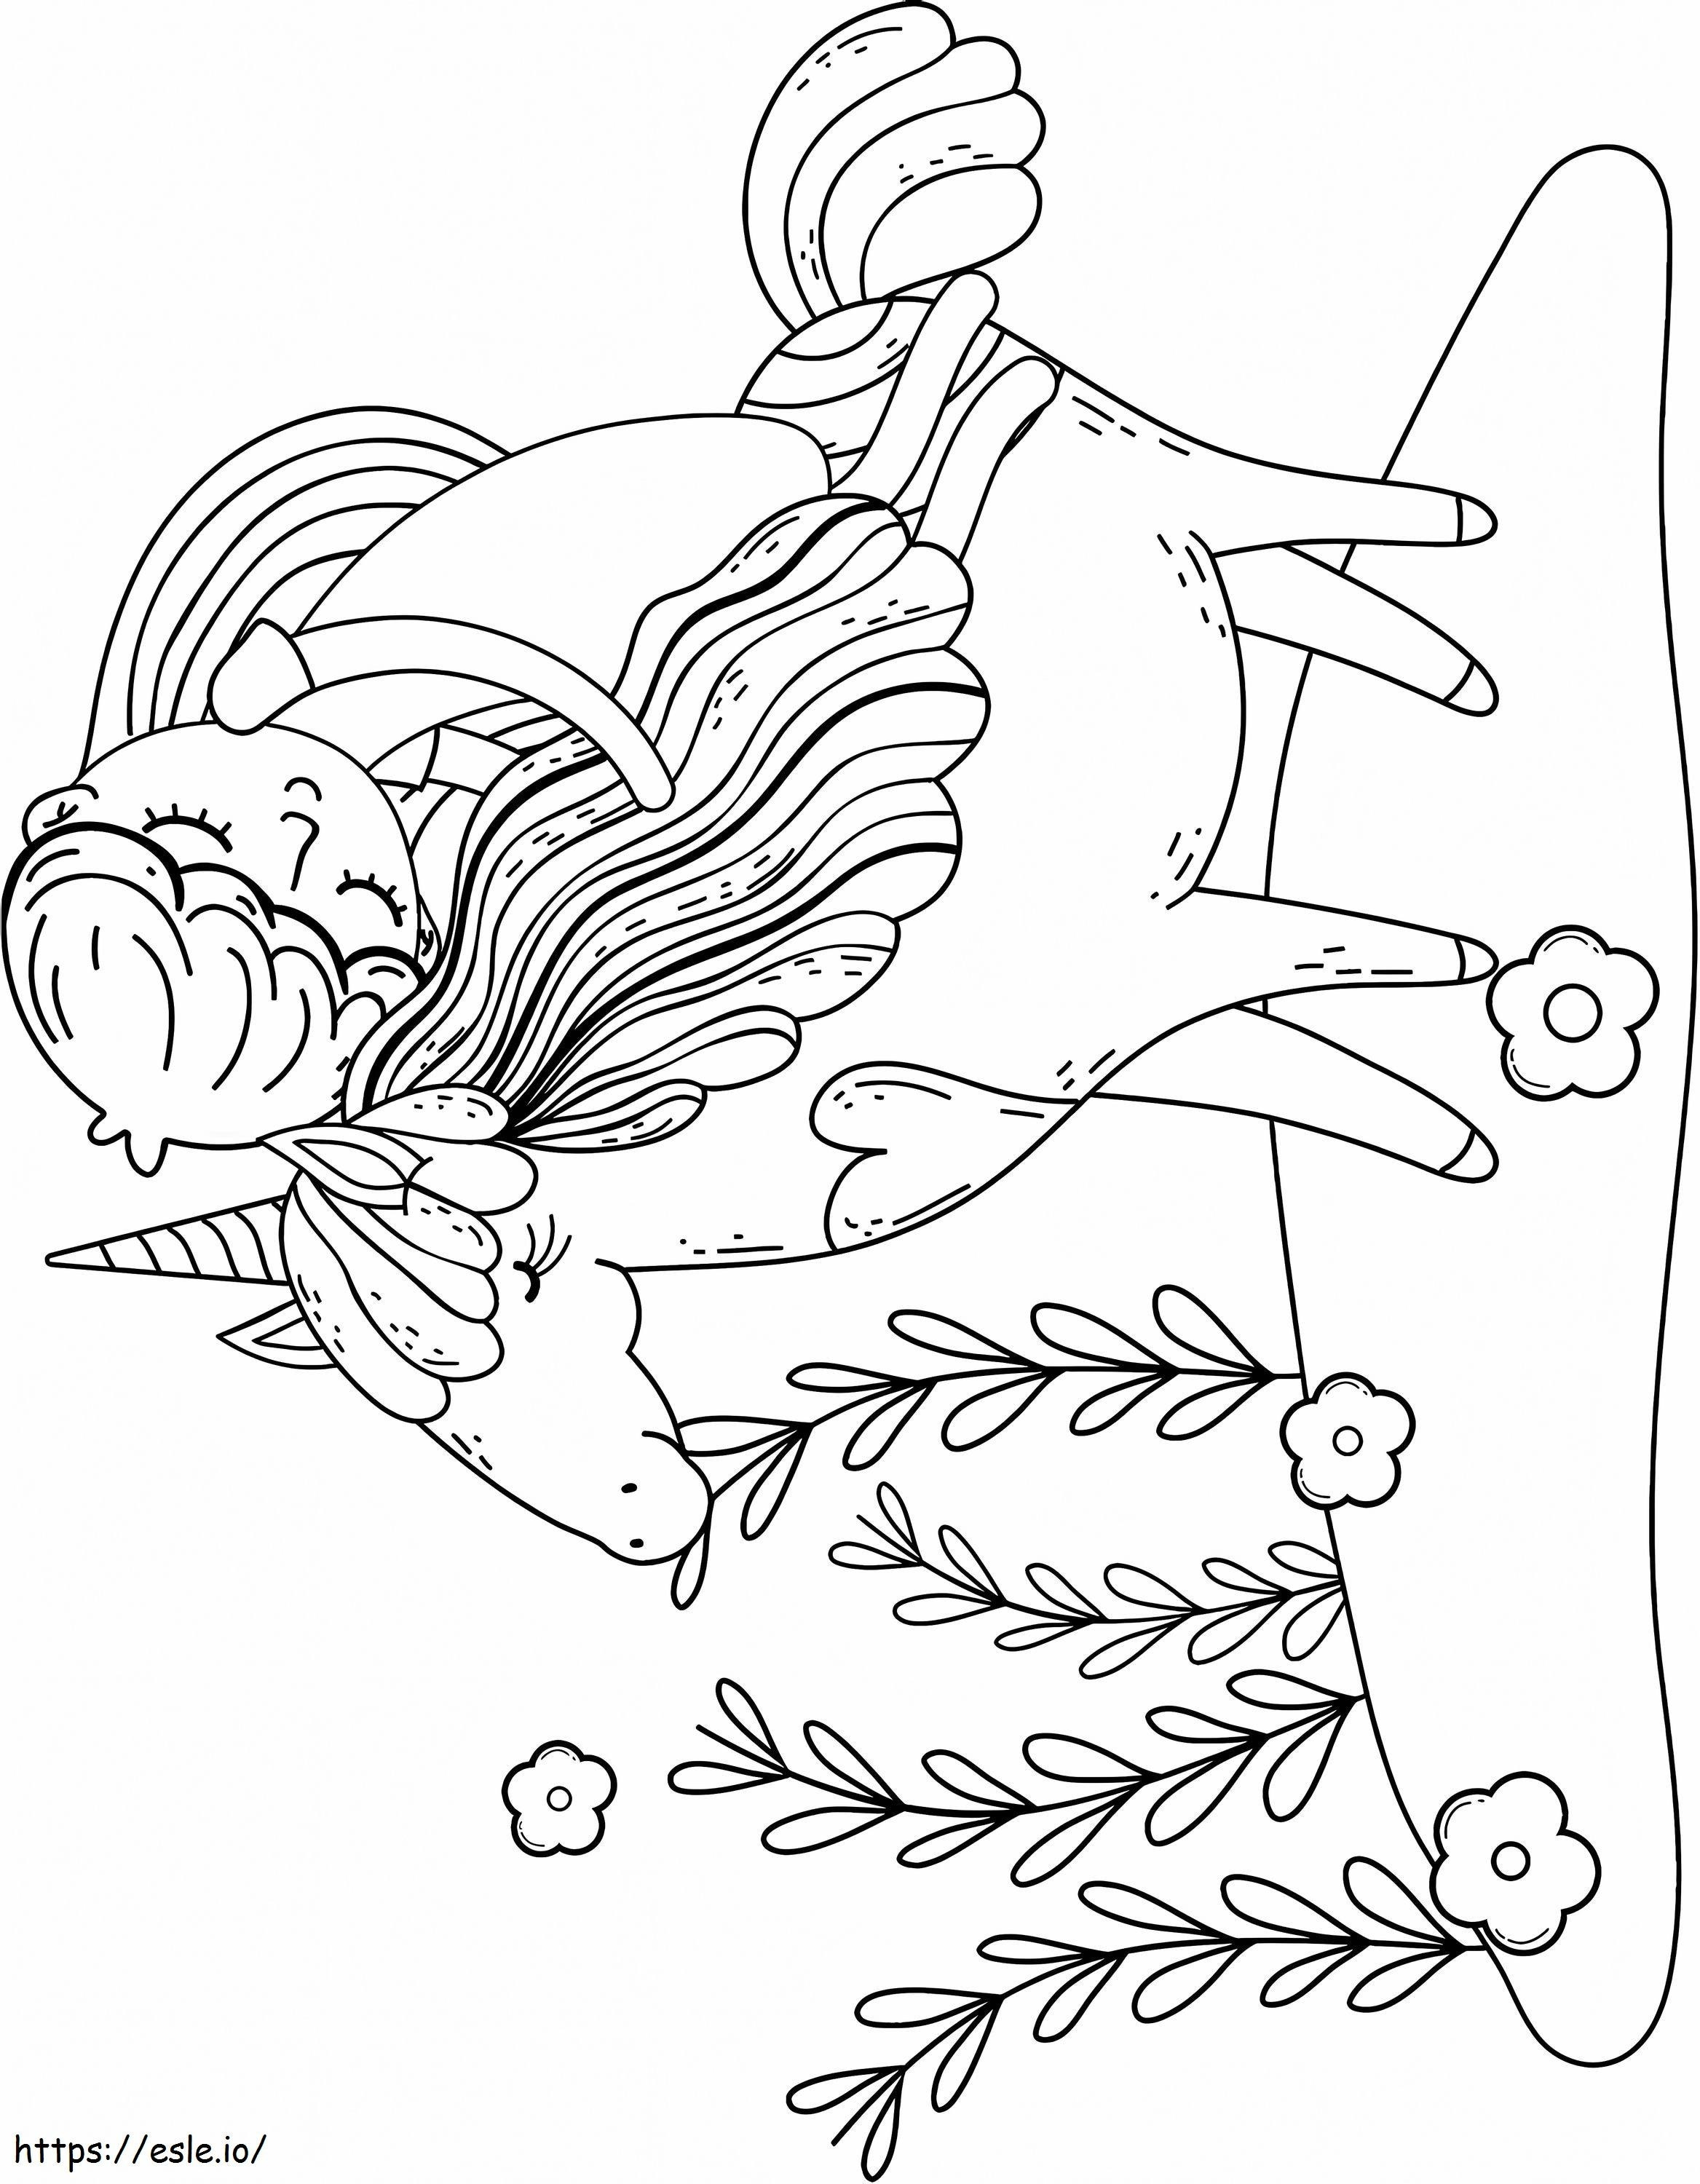 1564621289 Girl Sleeping On Unicorn A4 coloring page